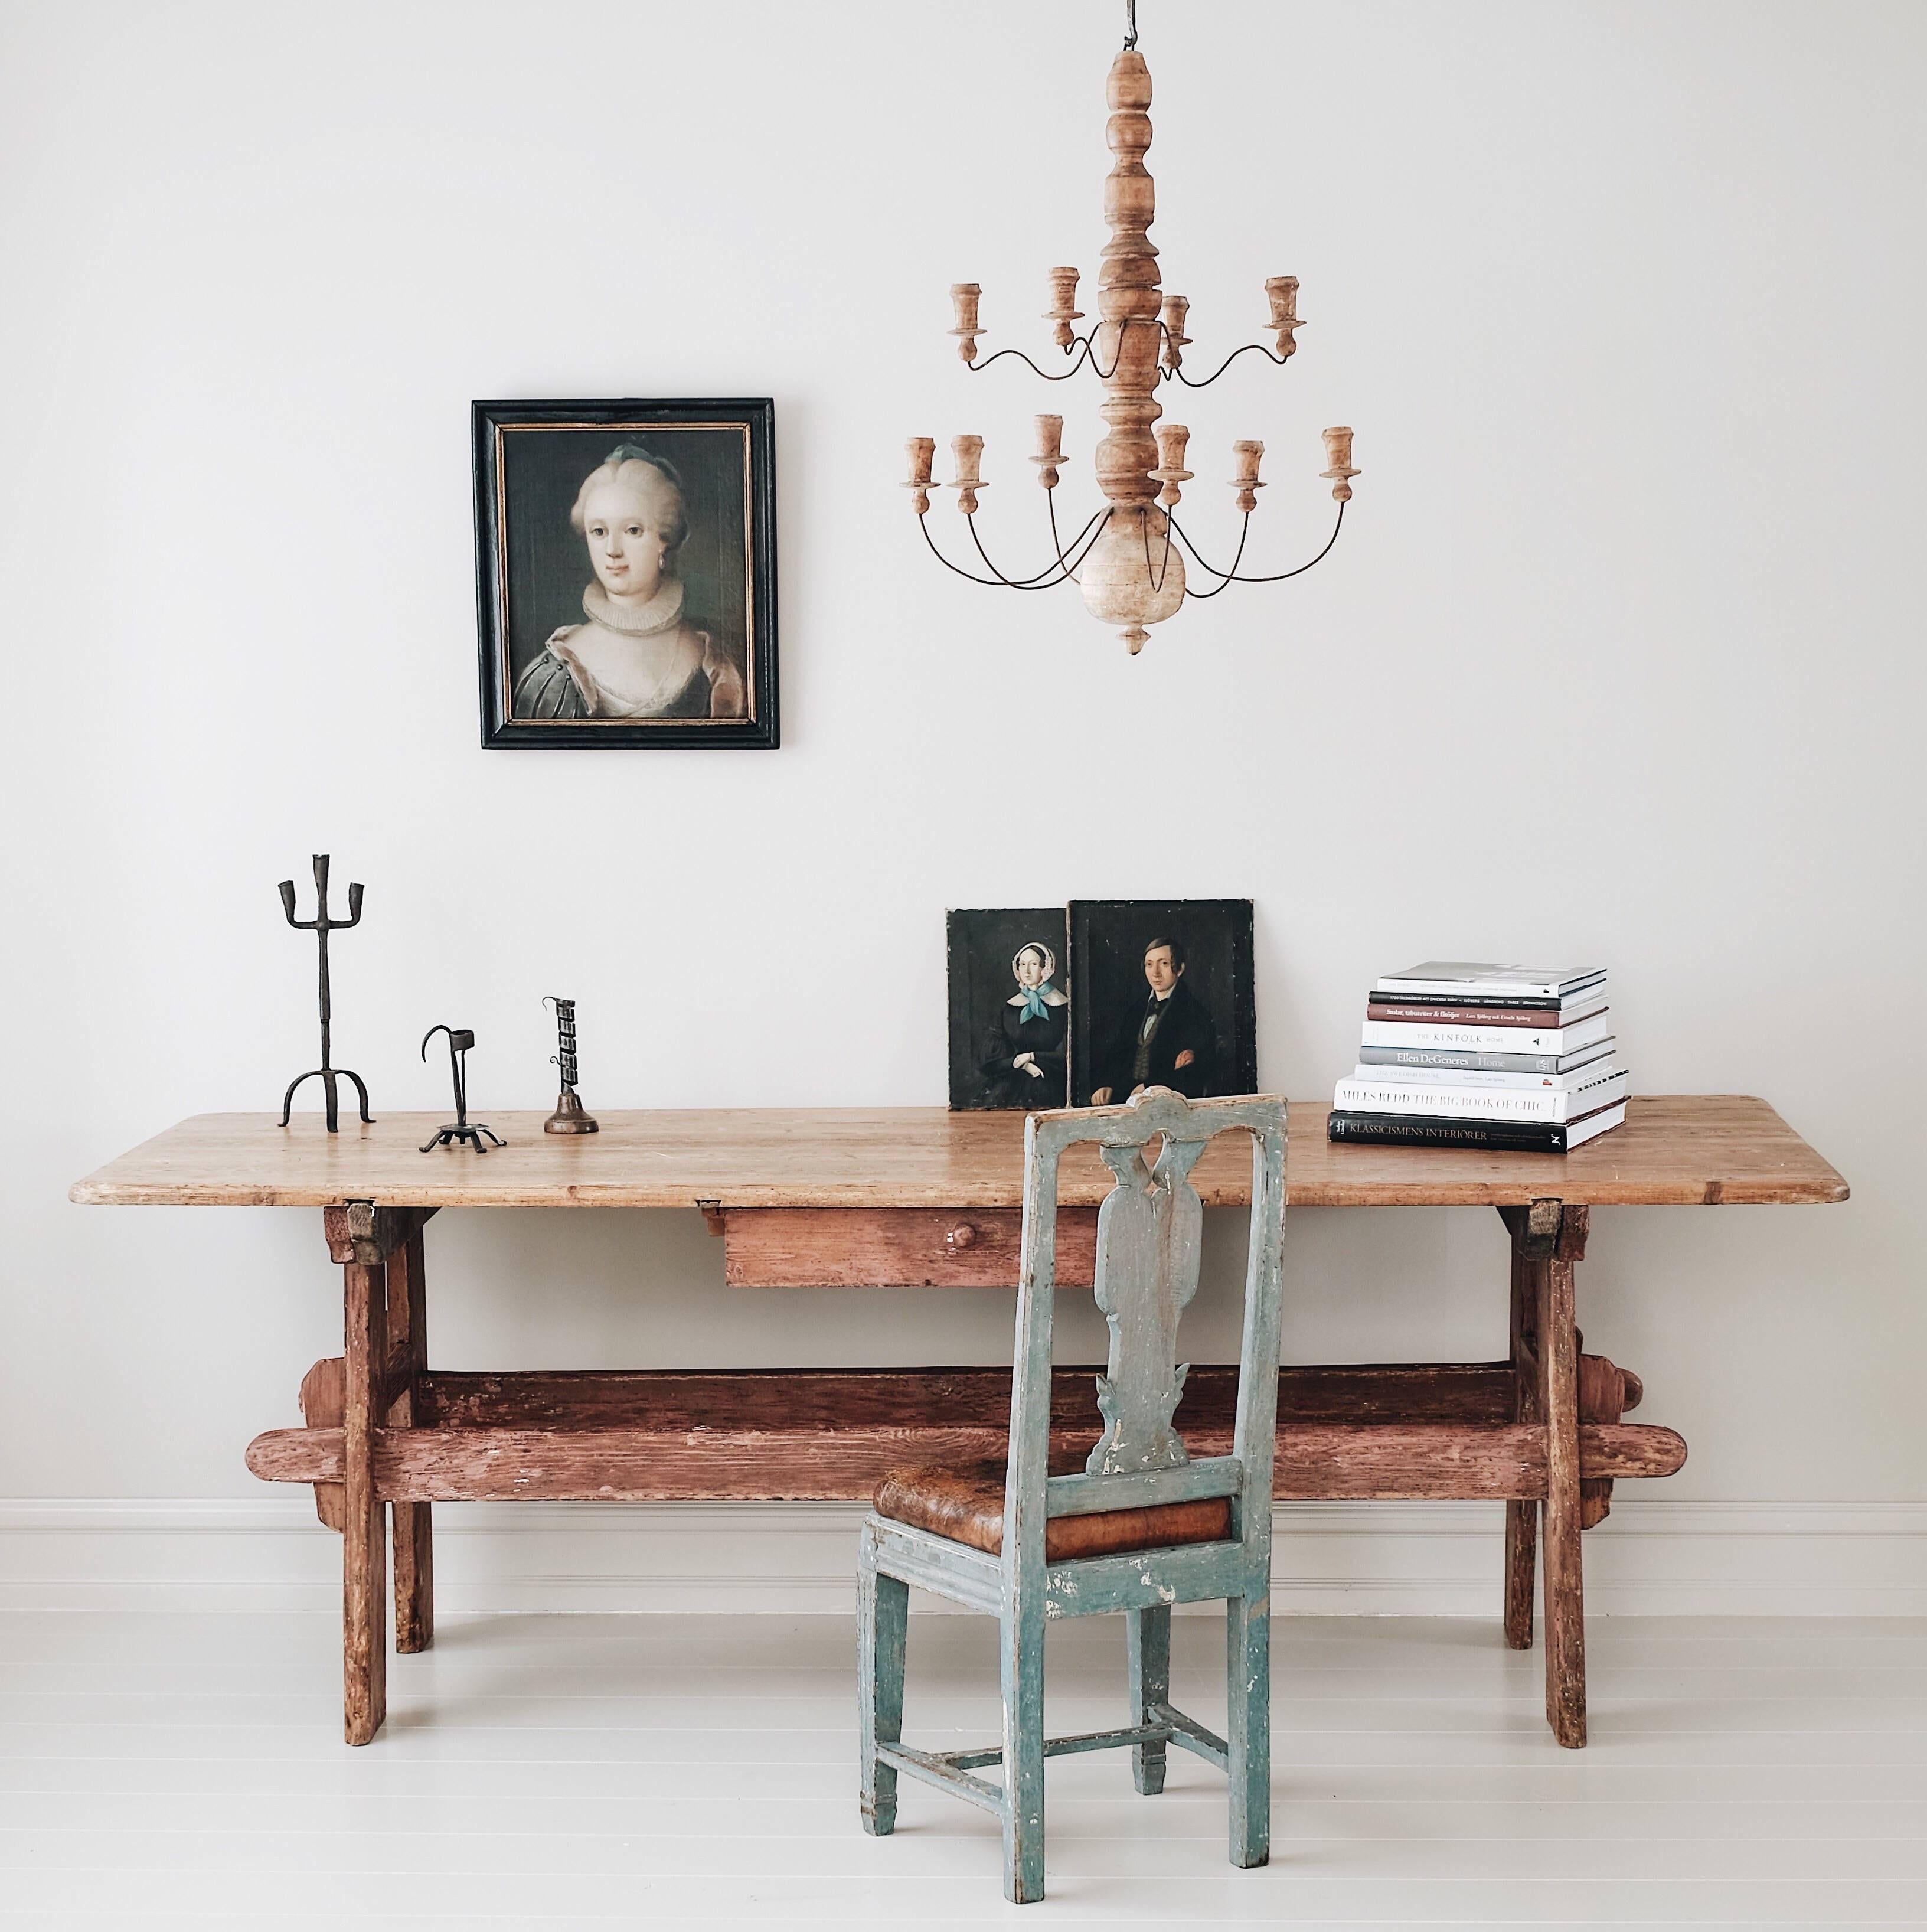 A very good 19th century Swedish Folk Art trestle table in its original finish with one drawer, circa 1800.